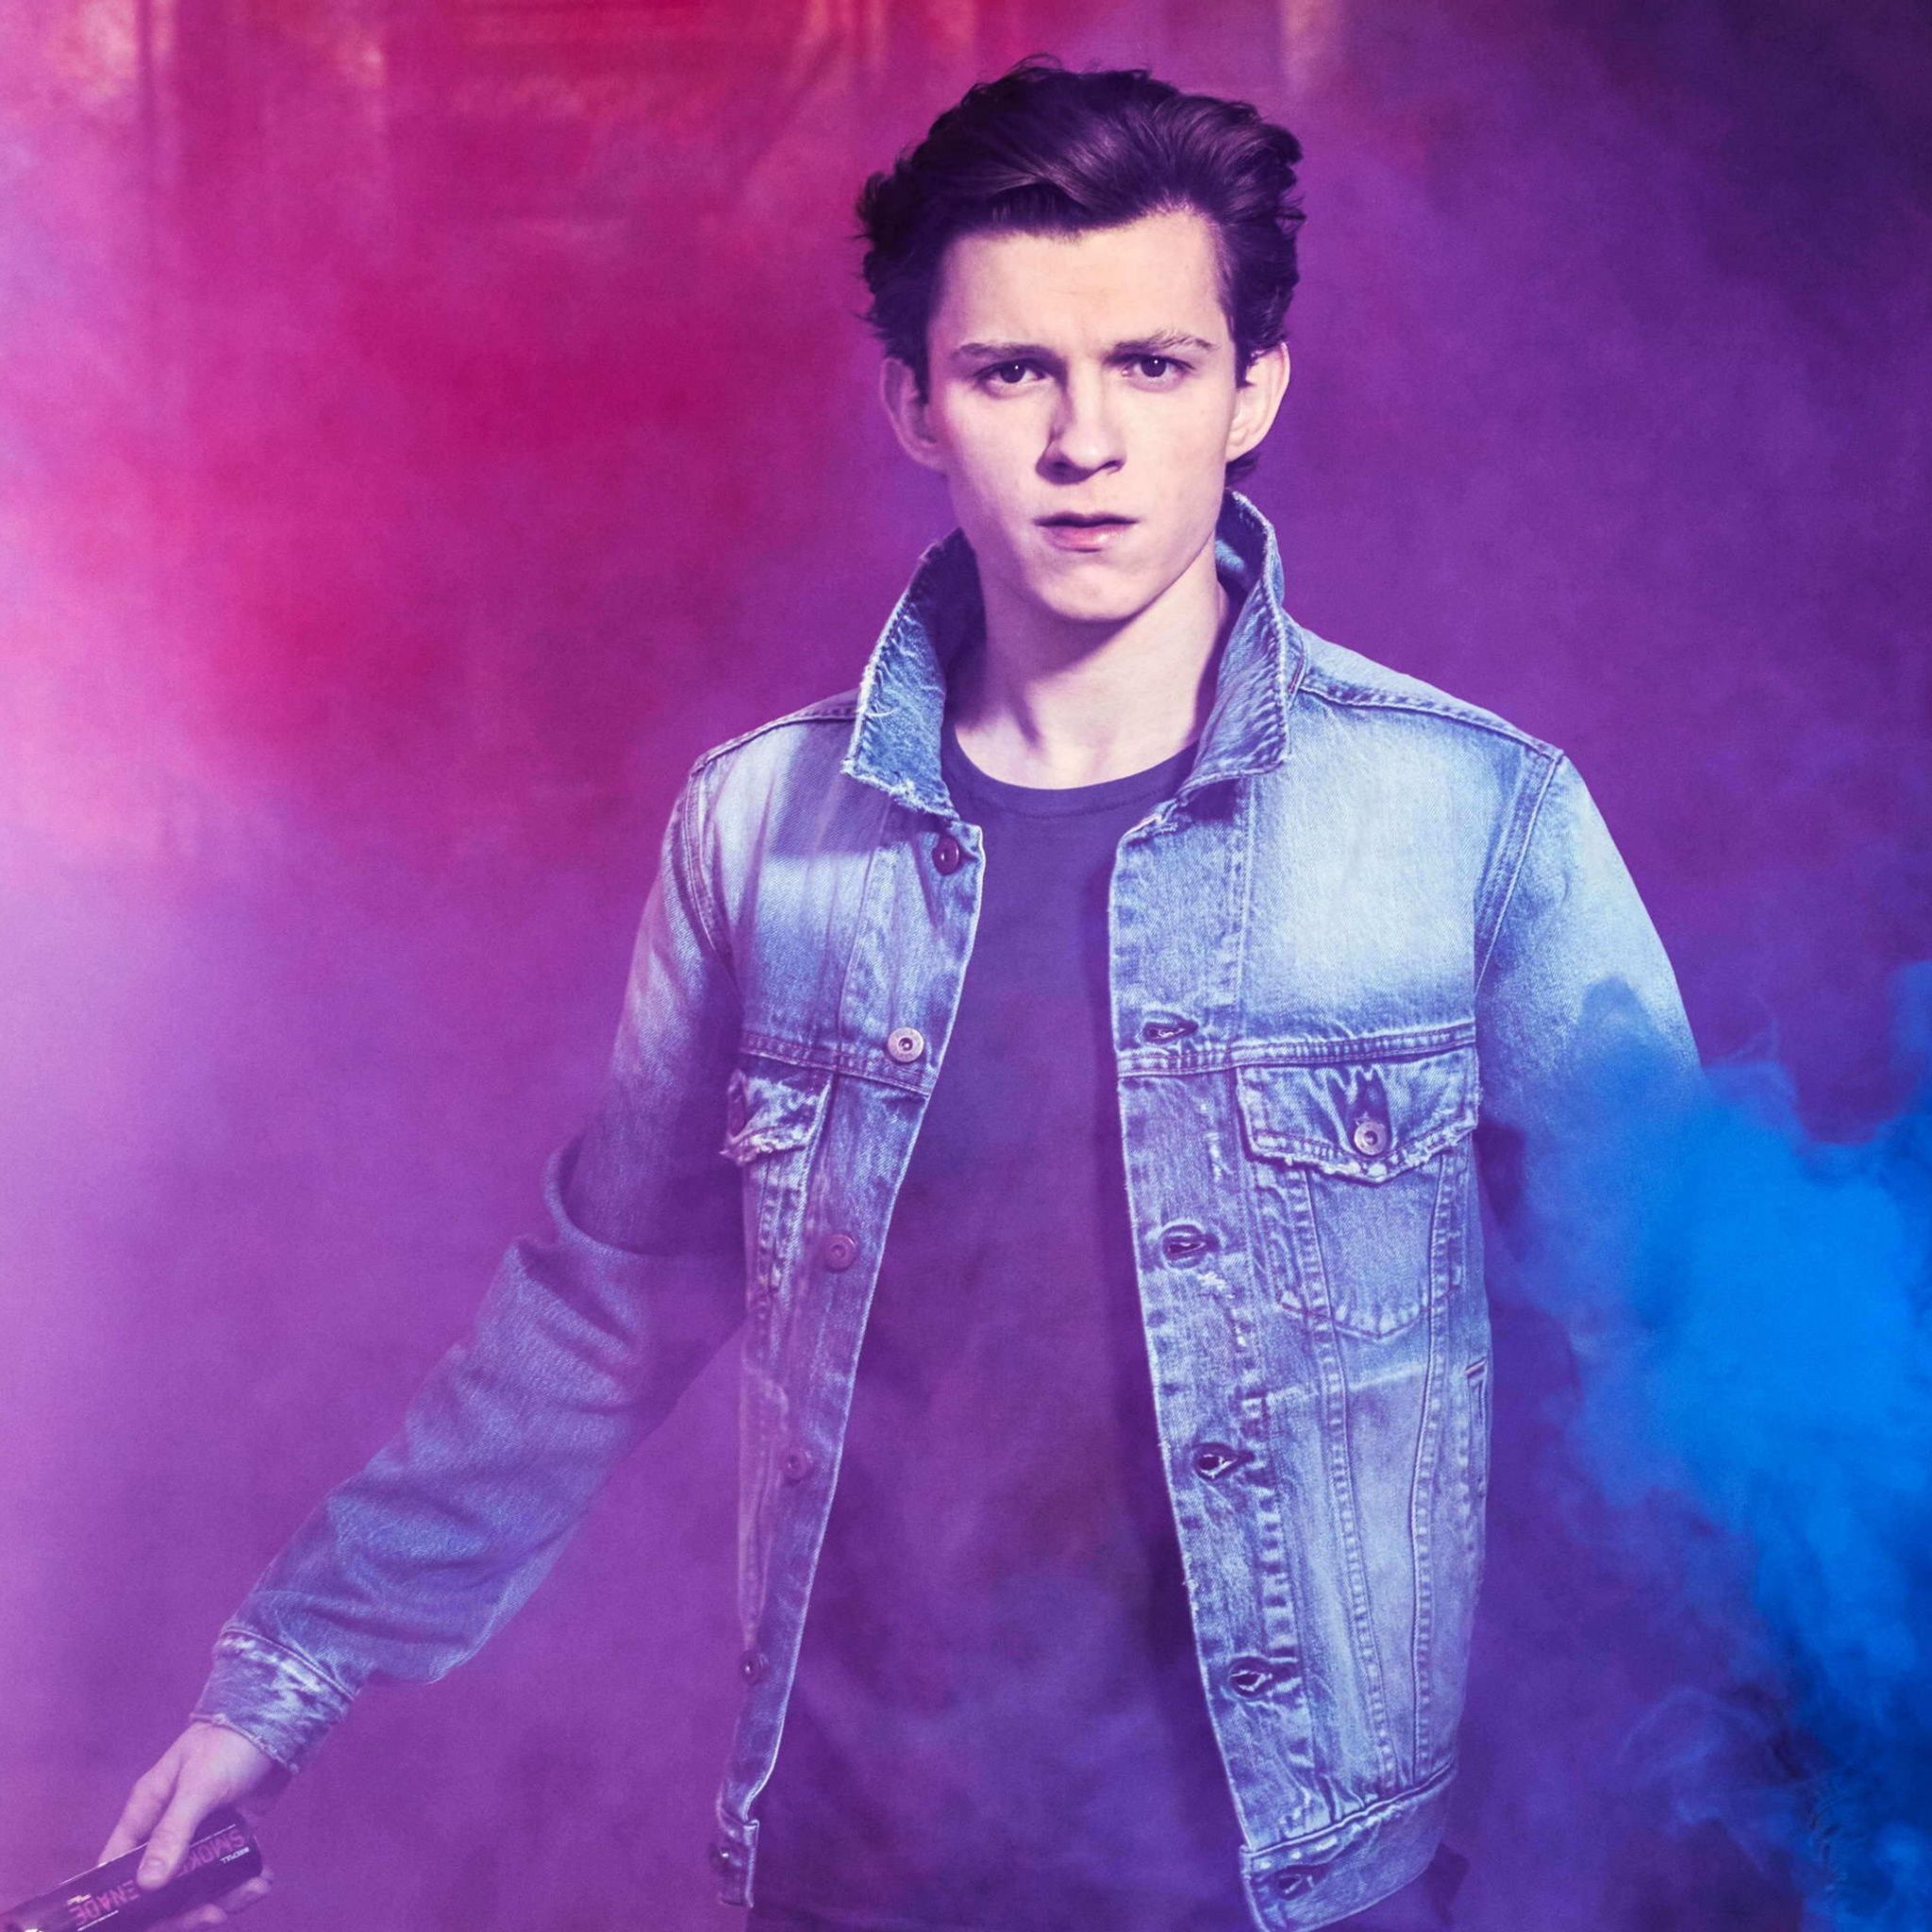 Tom Holland standing in a cloud of purple and blue smoke - Tom Holland